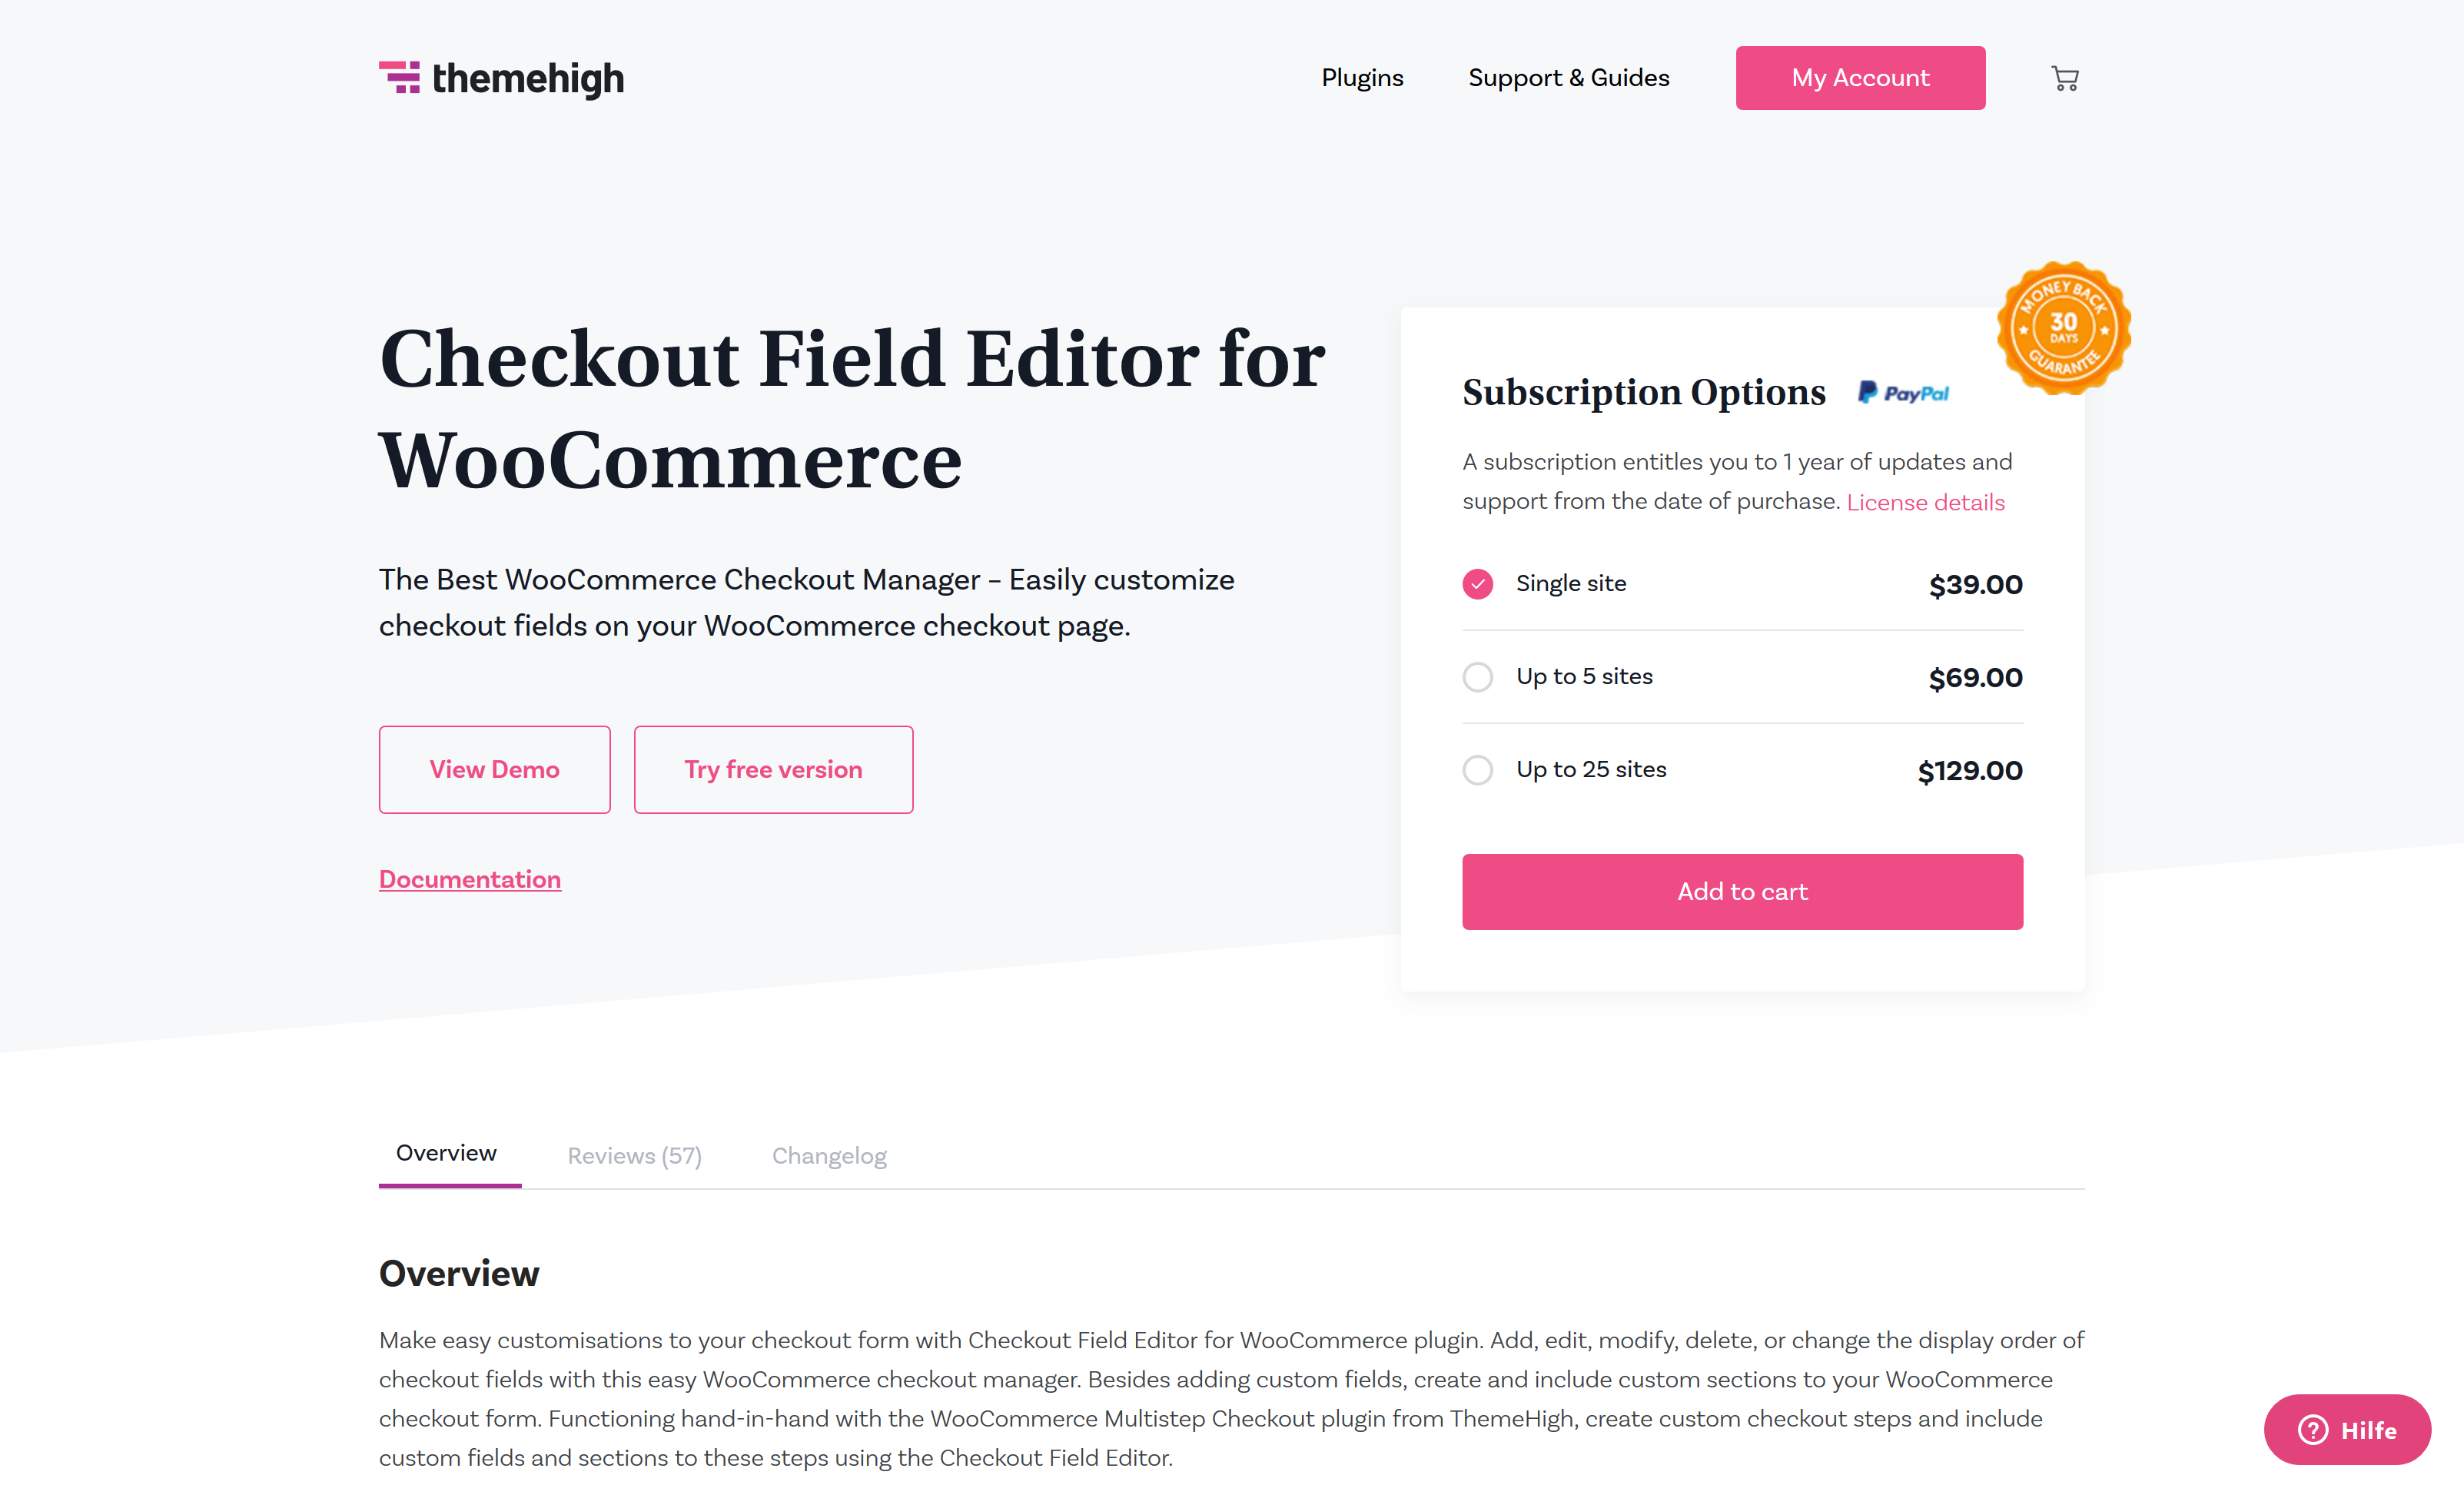 Checkout Field Editor for WooCommerce 3.3.0 by Themehigh